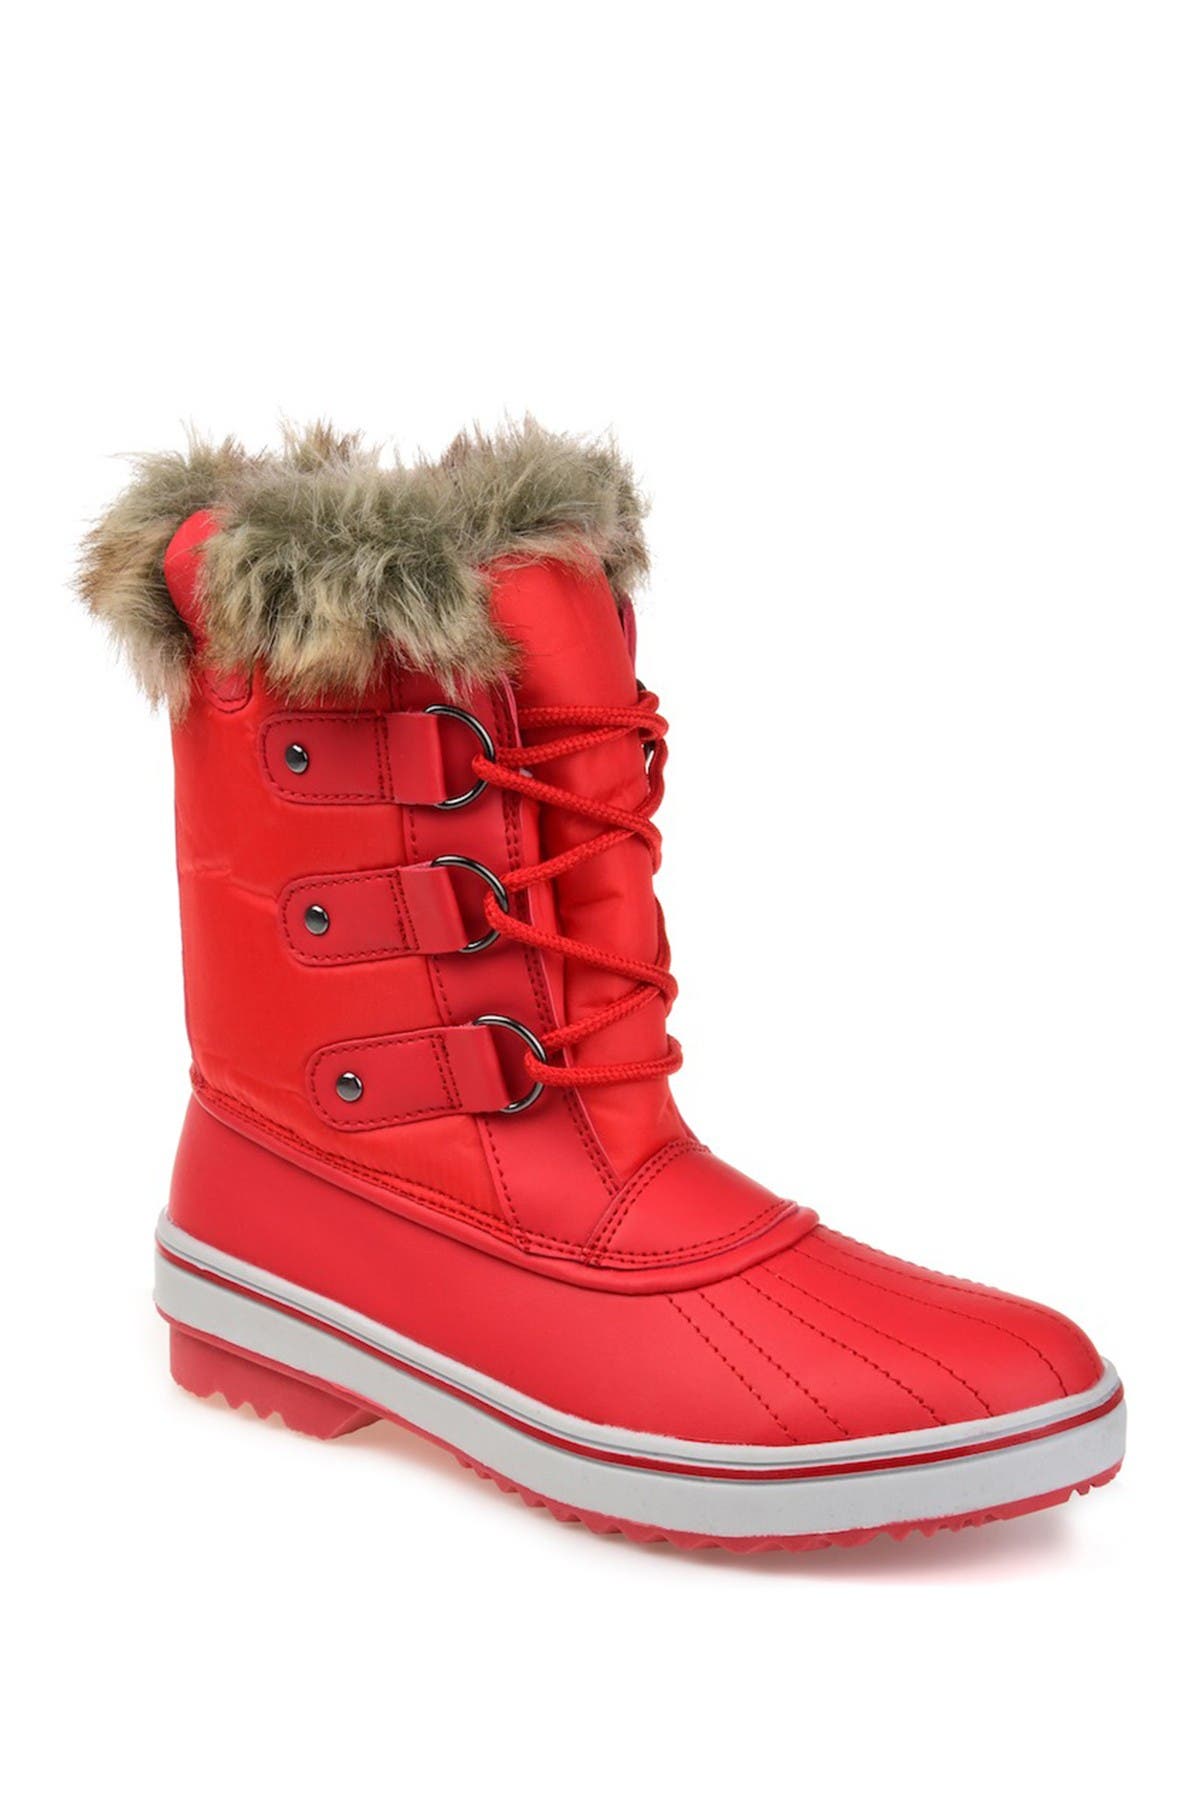 journee collection flurry snow boot